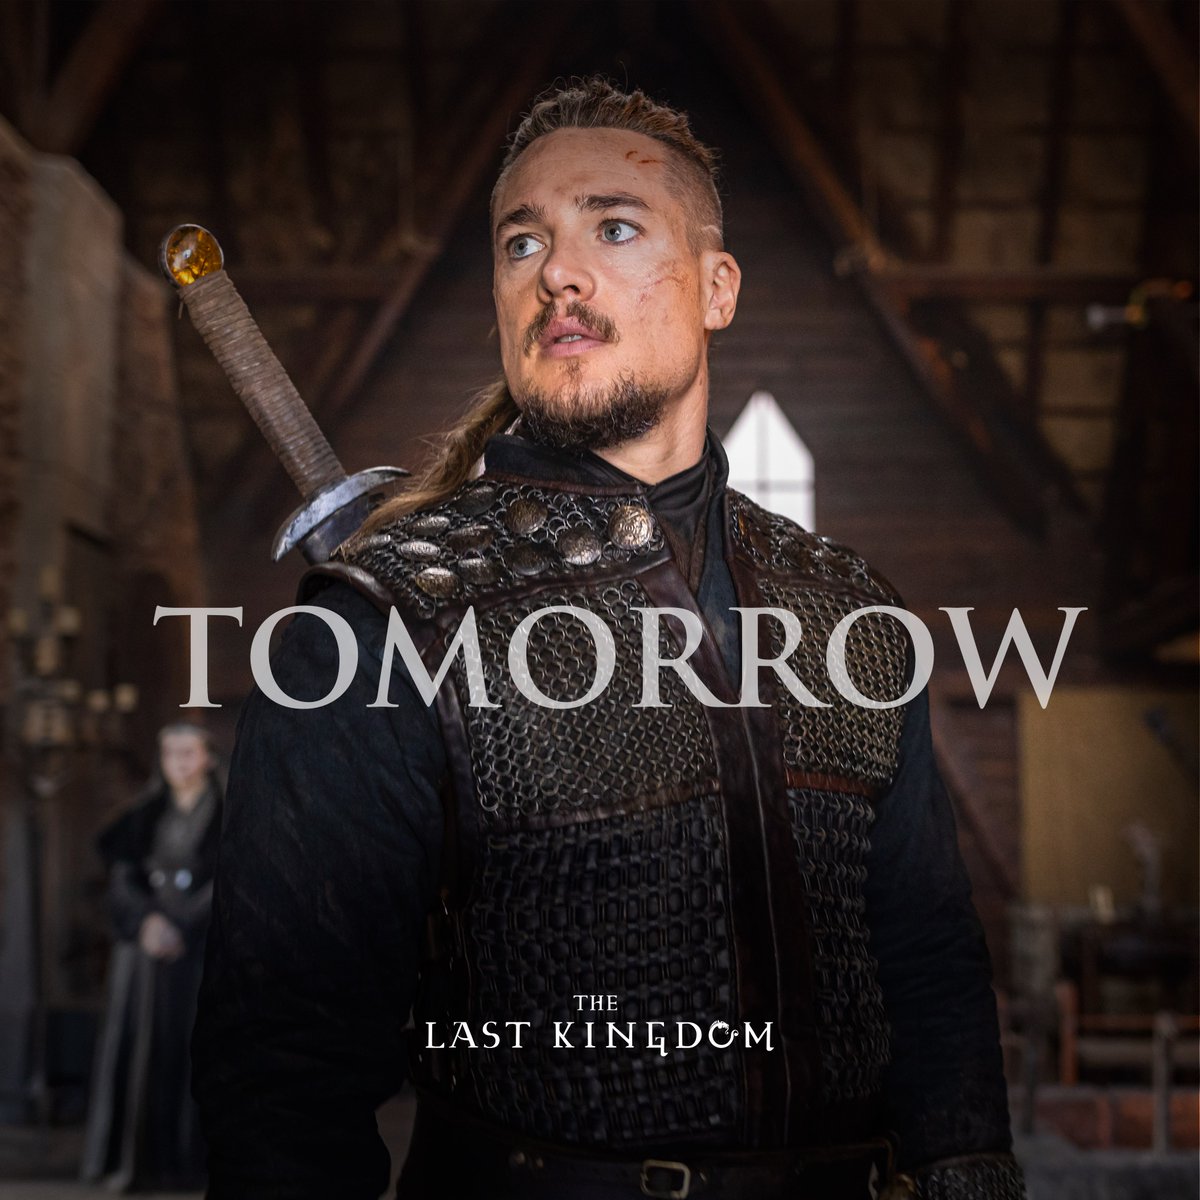 Uhtred is dressed for the occasion…Will you be? #TLK5 #TheLastKingdom